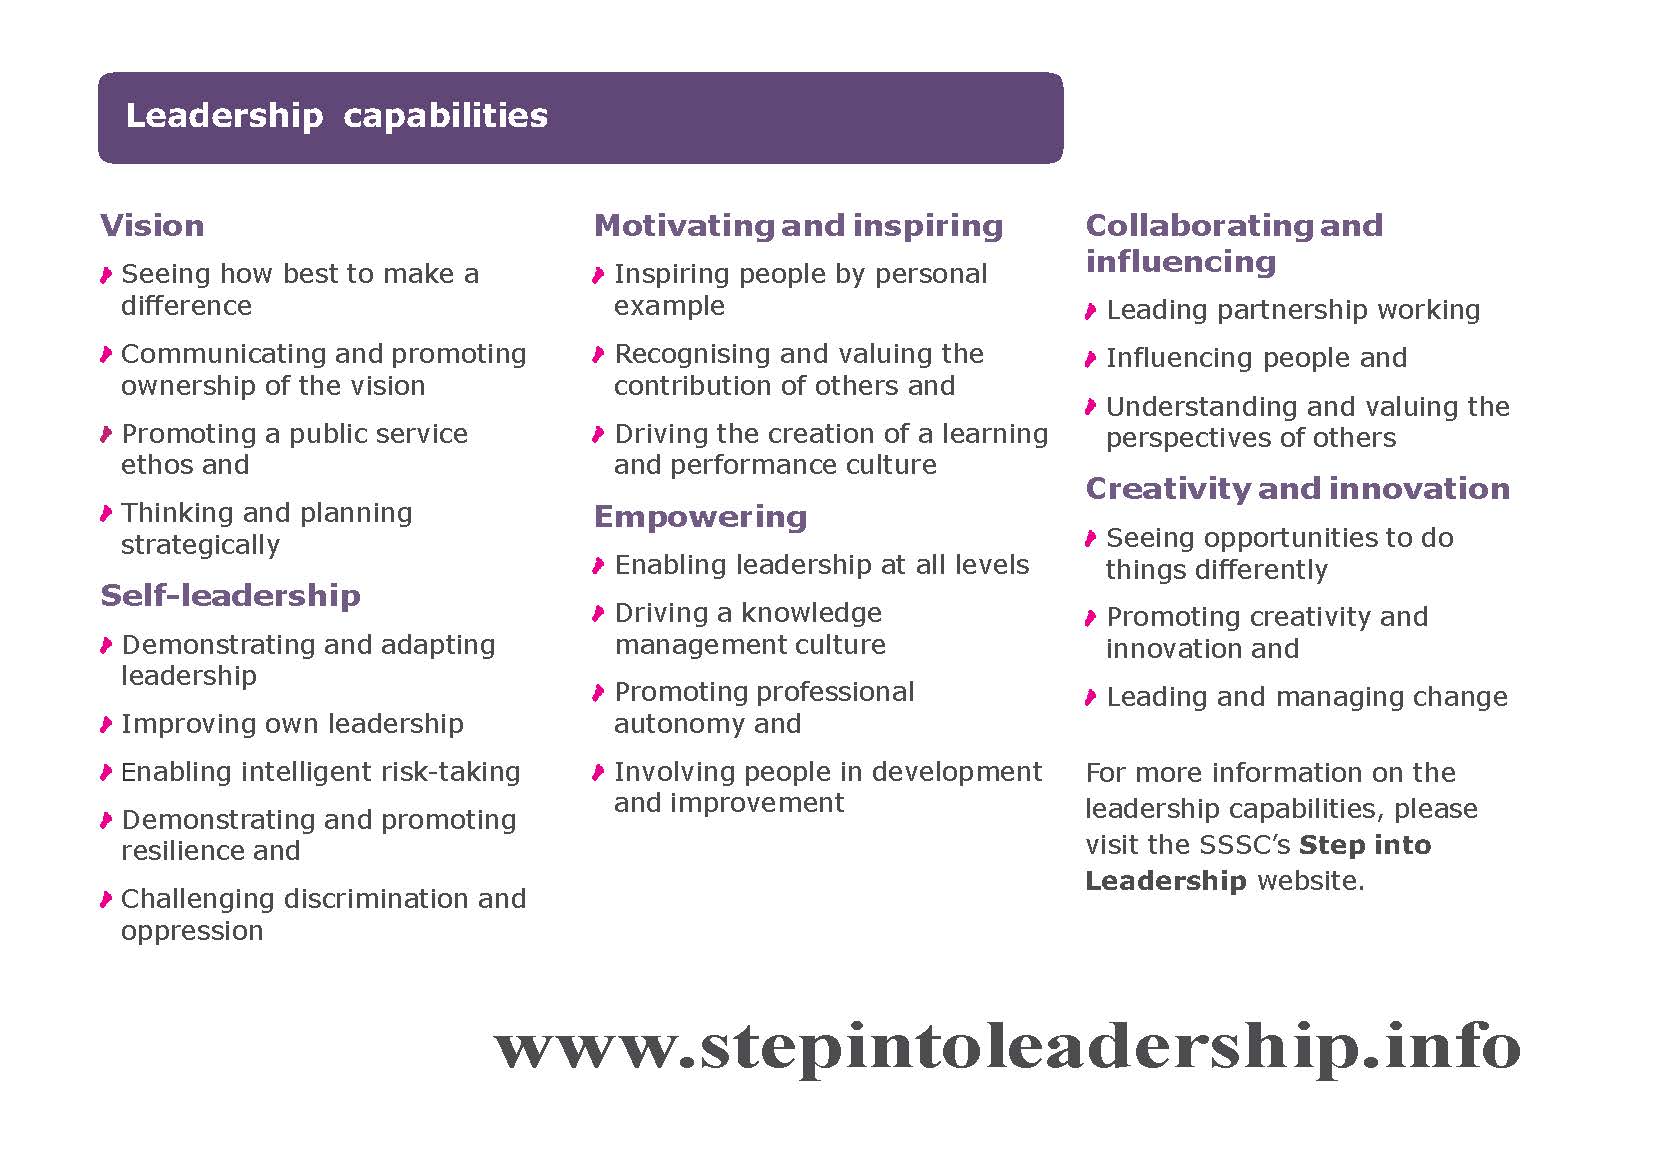 The six leadership capabilities. Open the PDF to read about them in full.